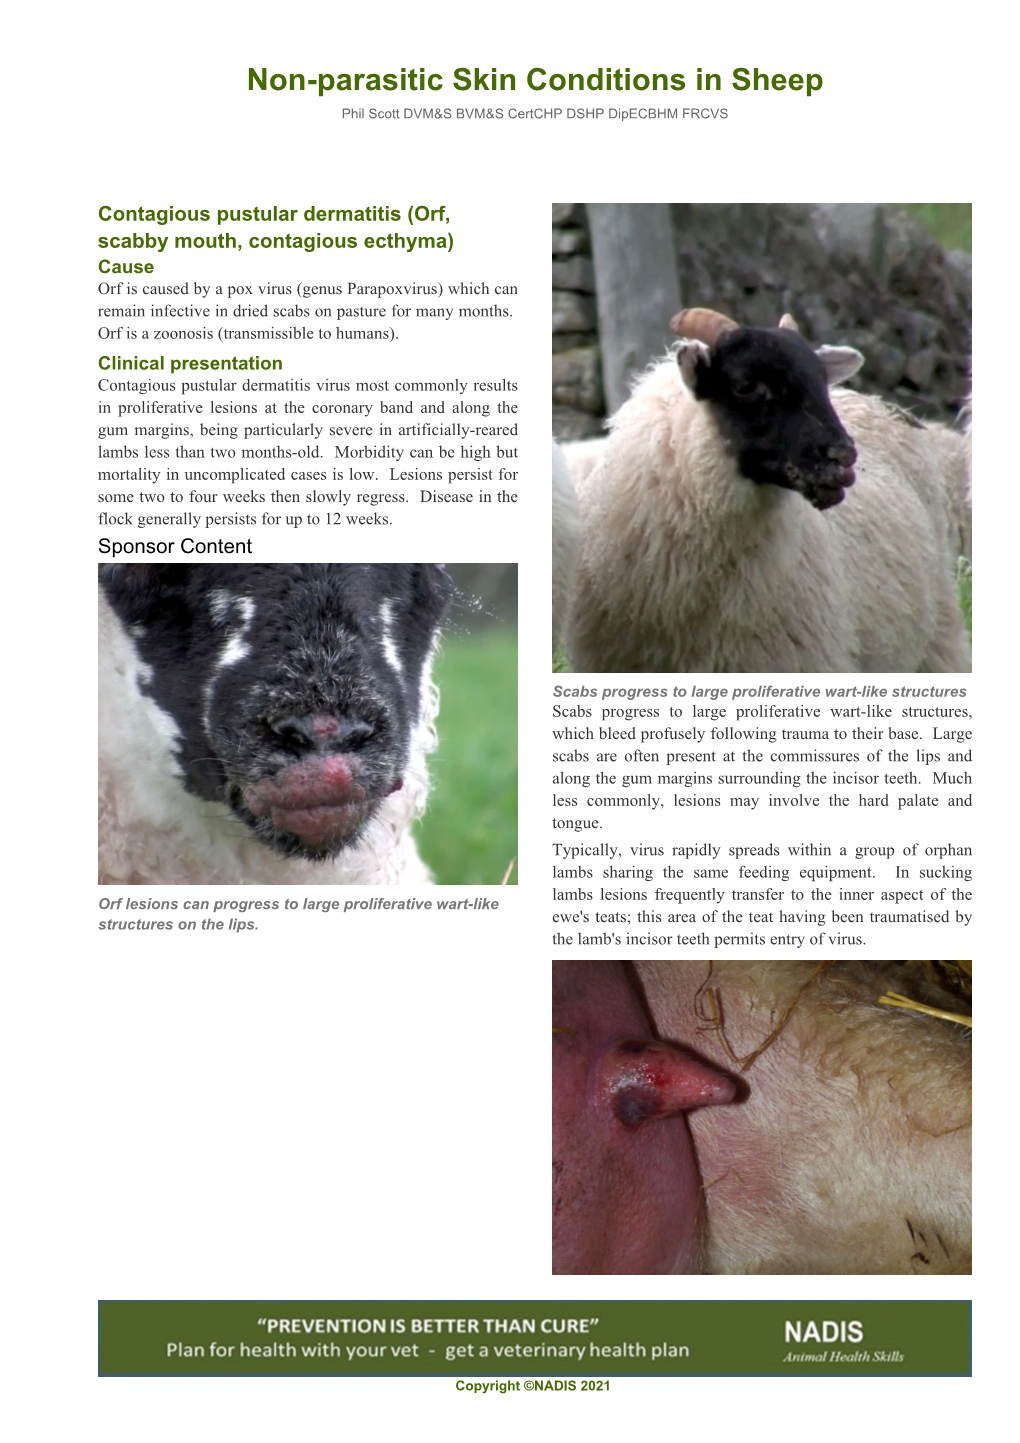 Non-Parasitic Skin Conditions in Sheep Phil Scott DVM&S BVM&S Certchp DSHP Dipecbhm FRCVS